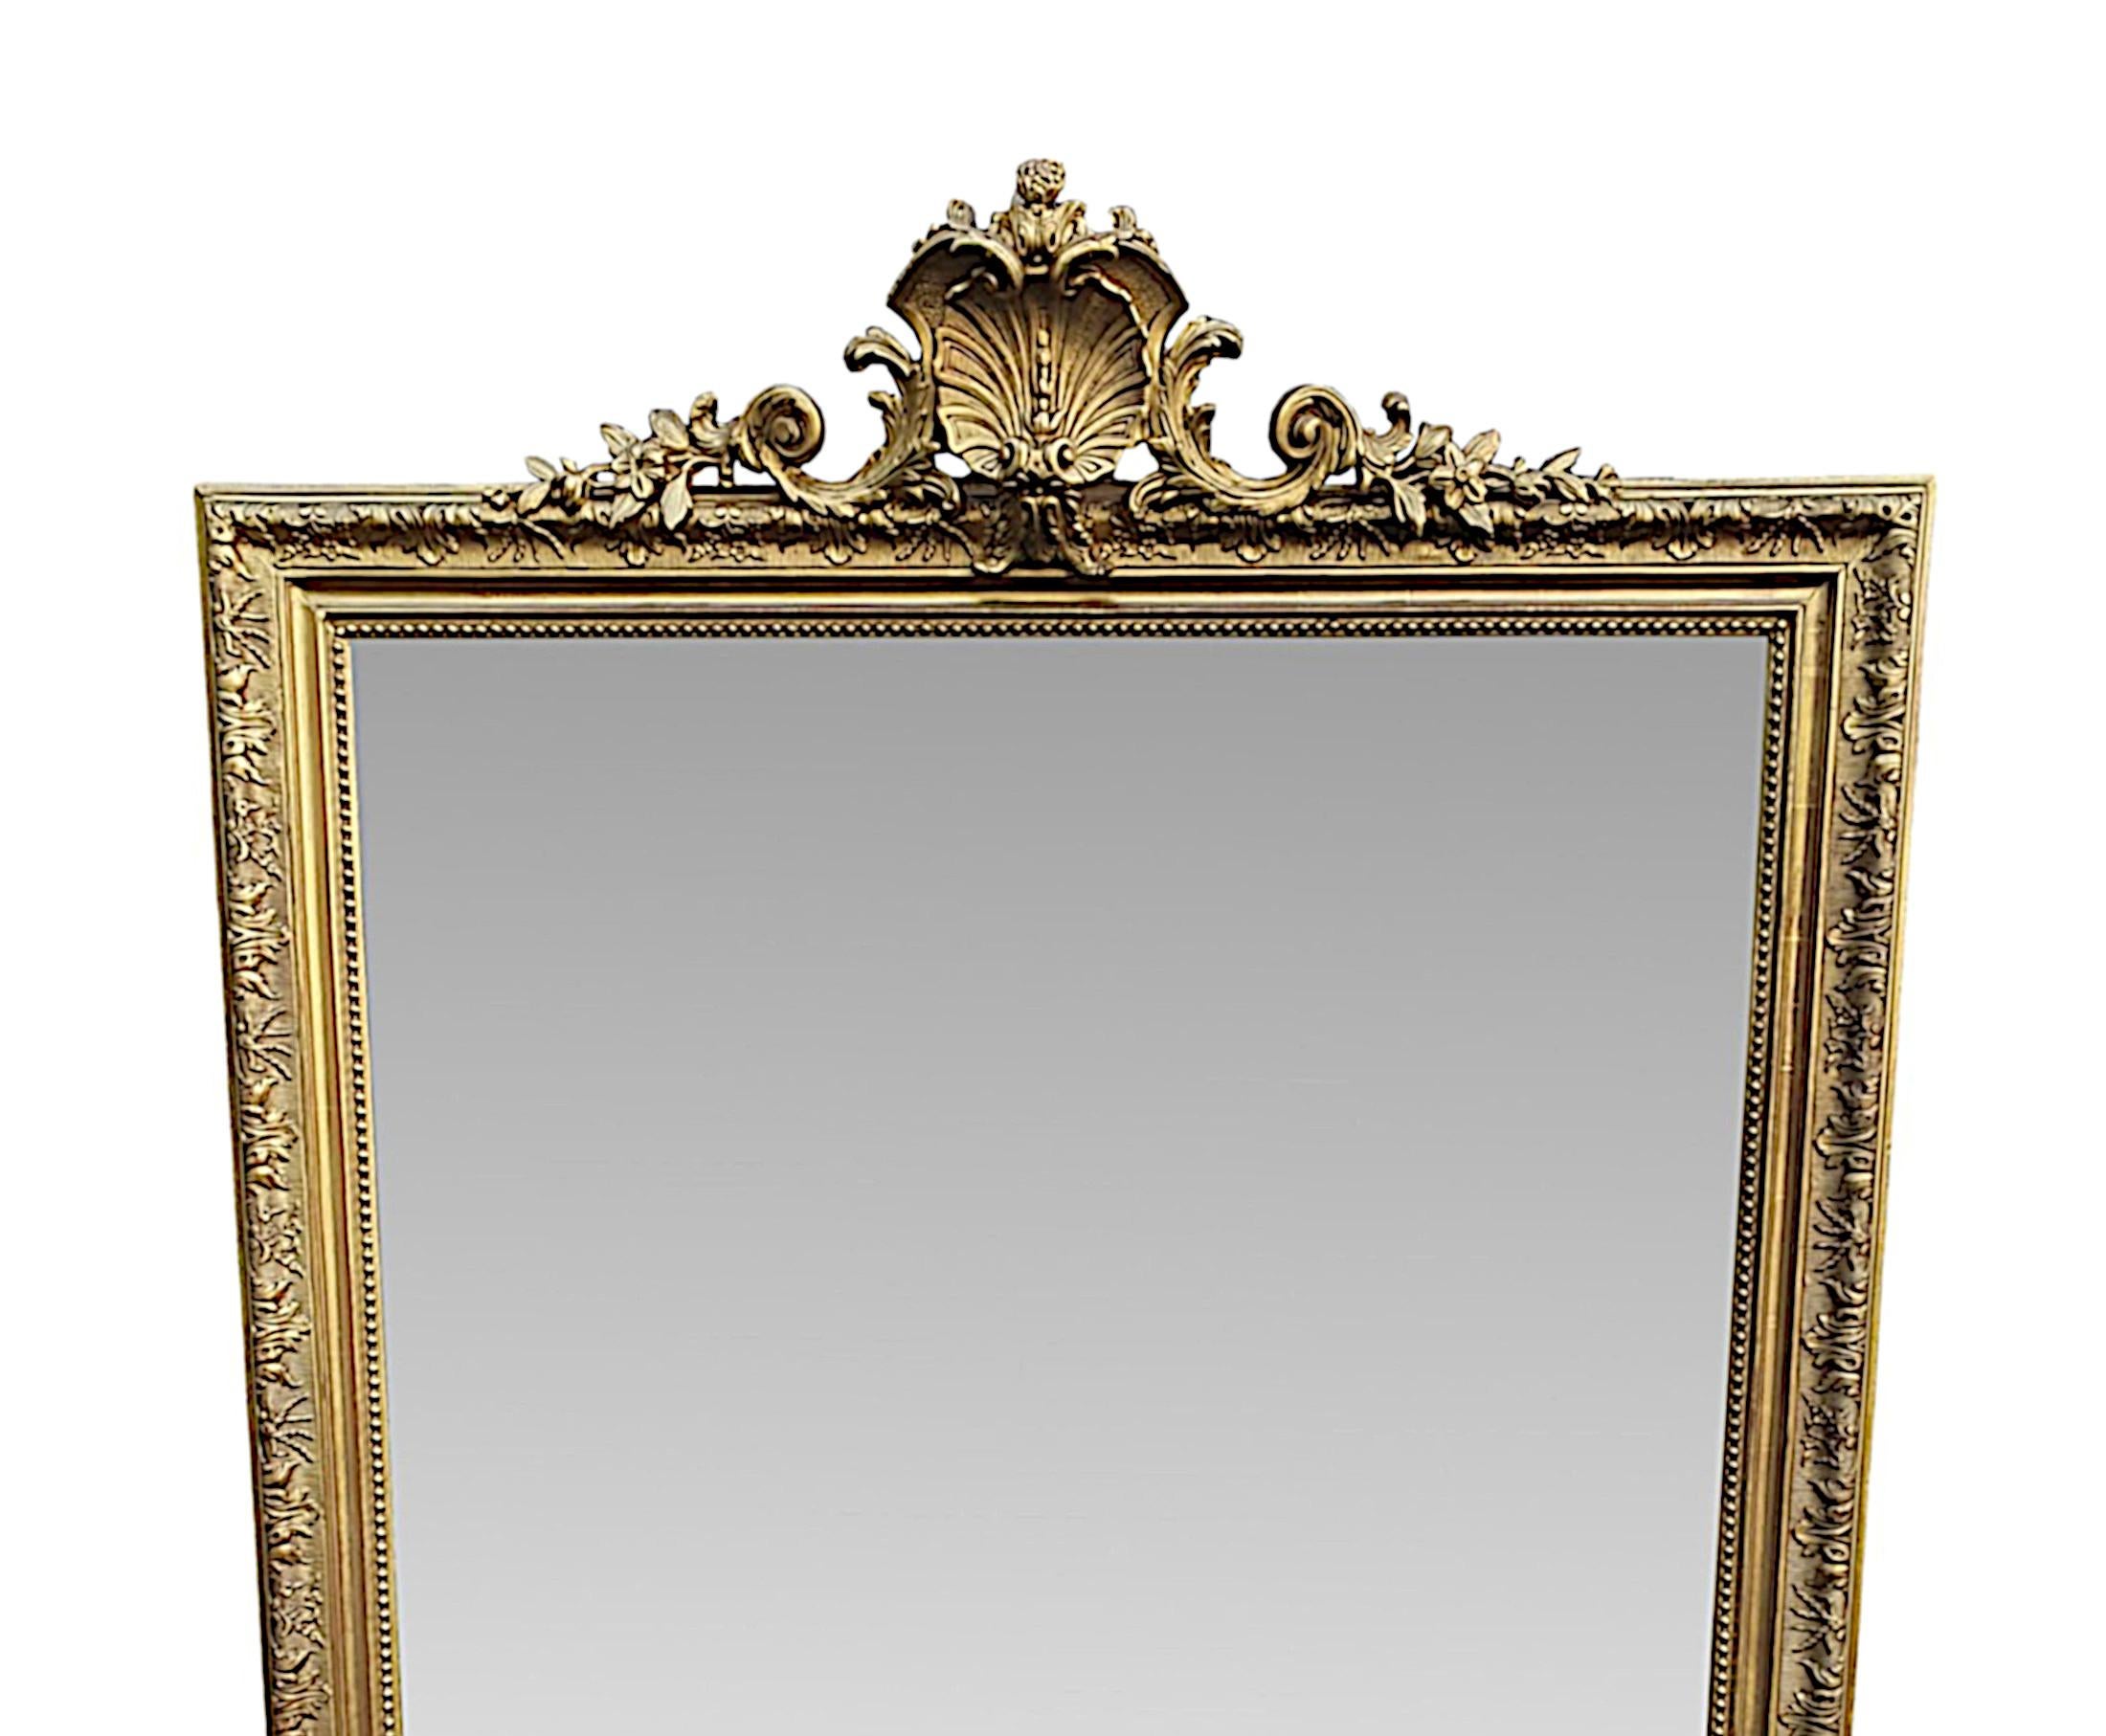 A very fine 19th century giltwood overmantle or hall mirror of rectangular form. The mirror glass plate is set within a hand carved and moulded giltwood frame with beaded detail and a further outer border embellished with intricate floral and ruffle